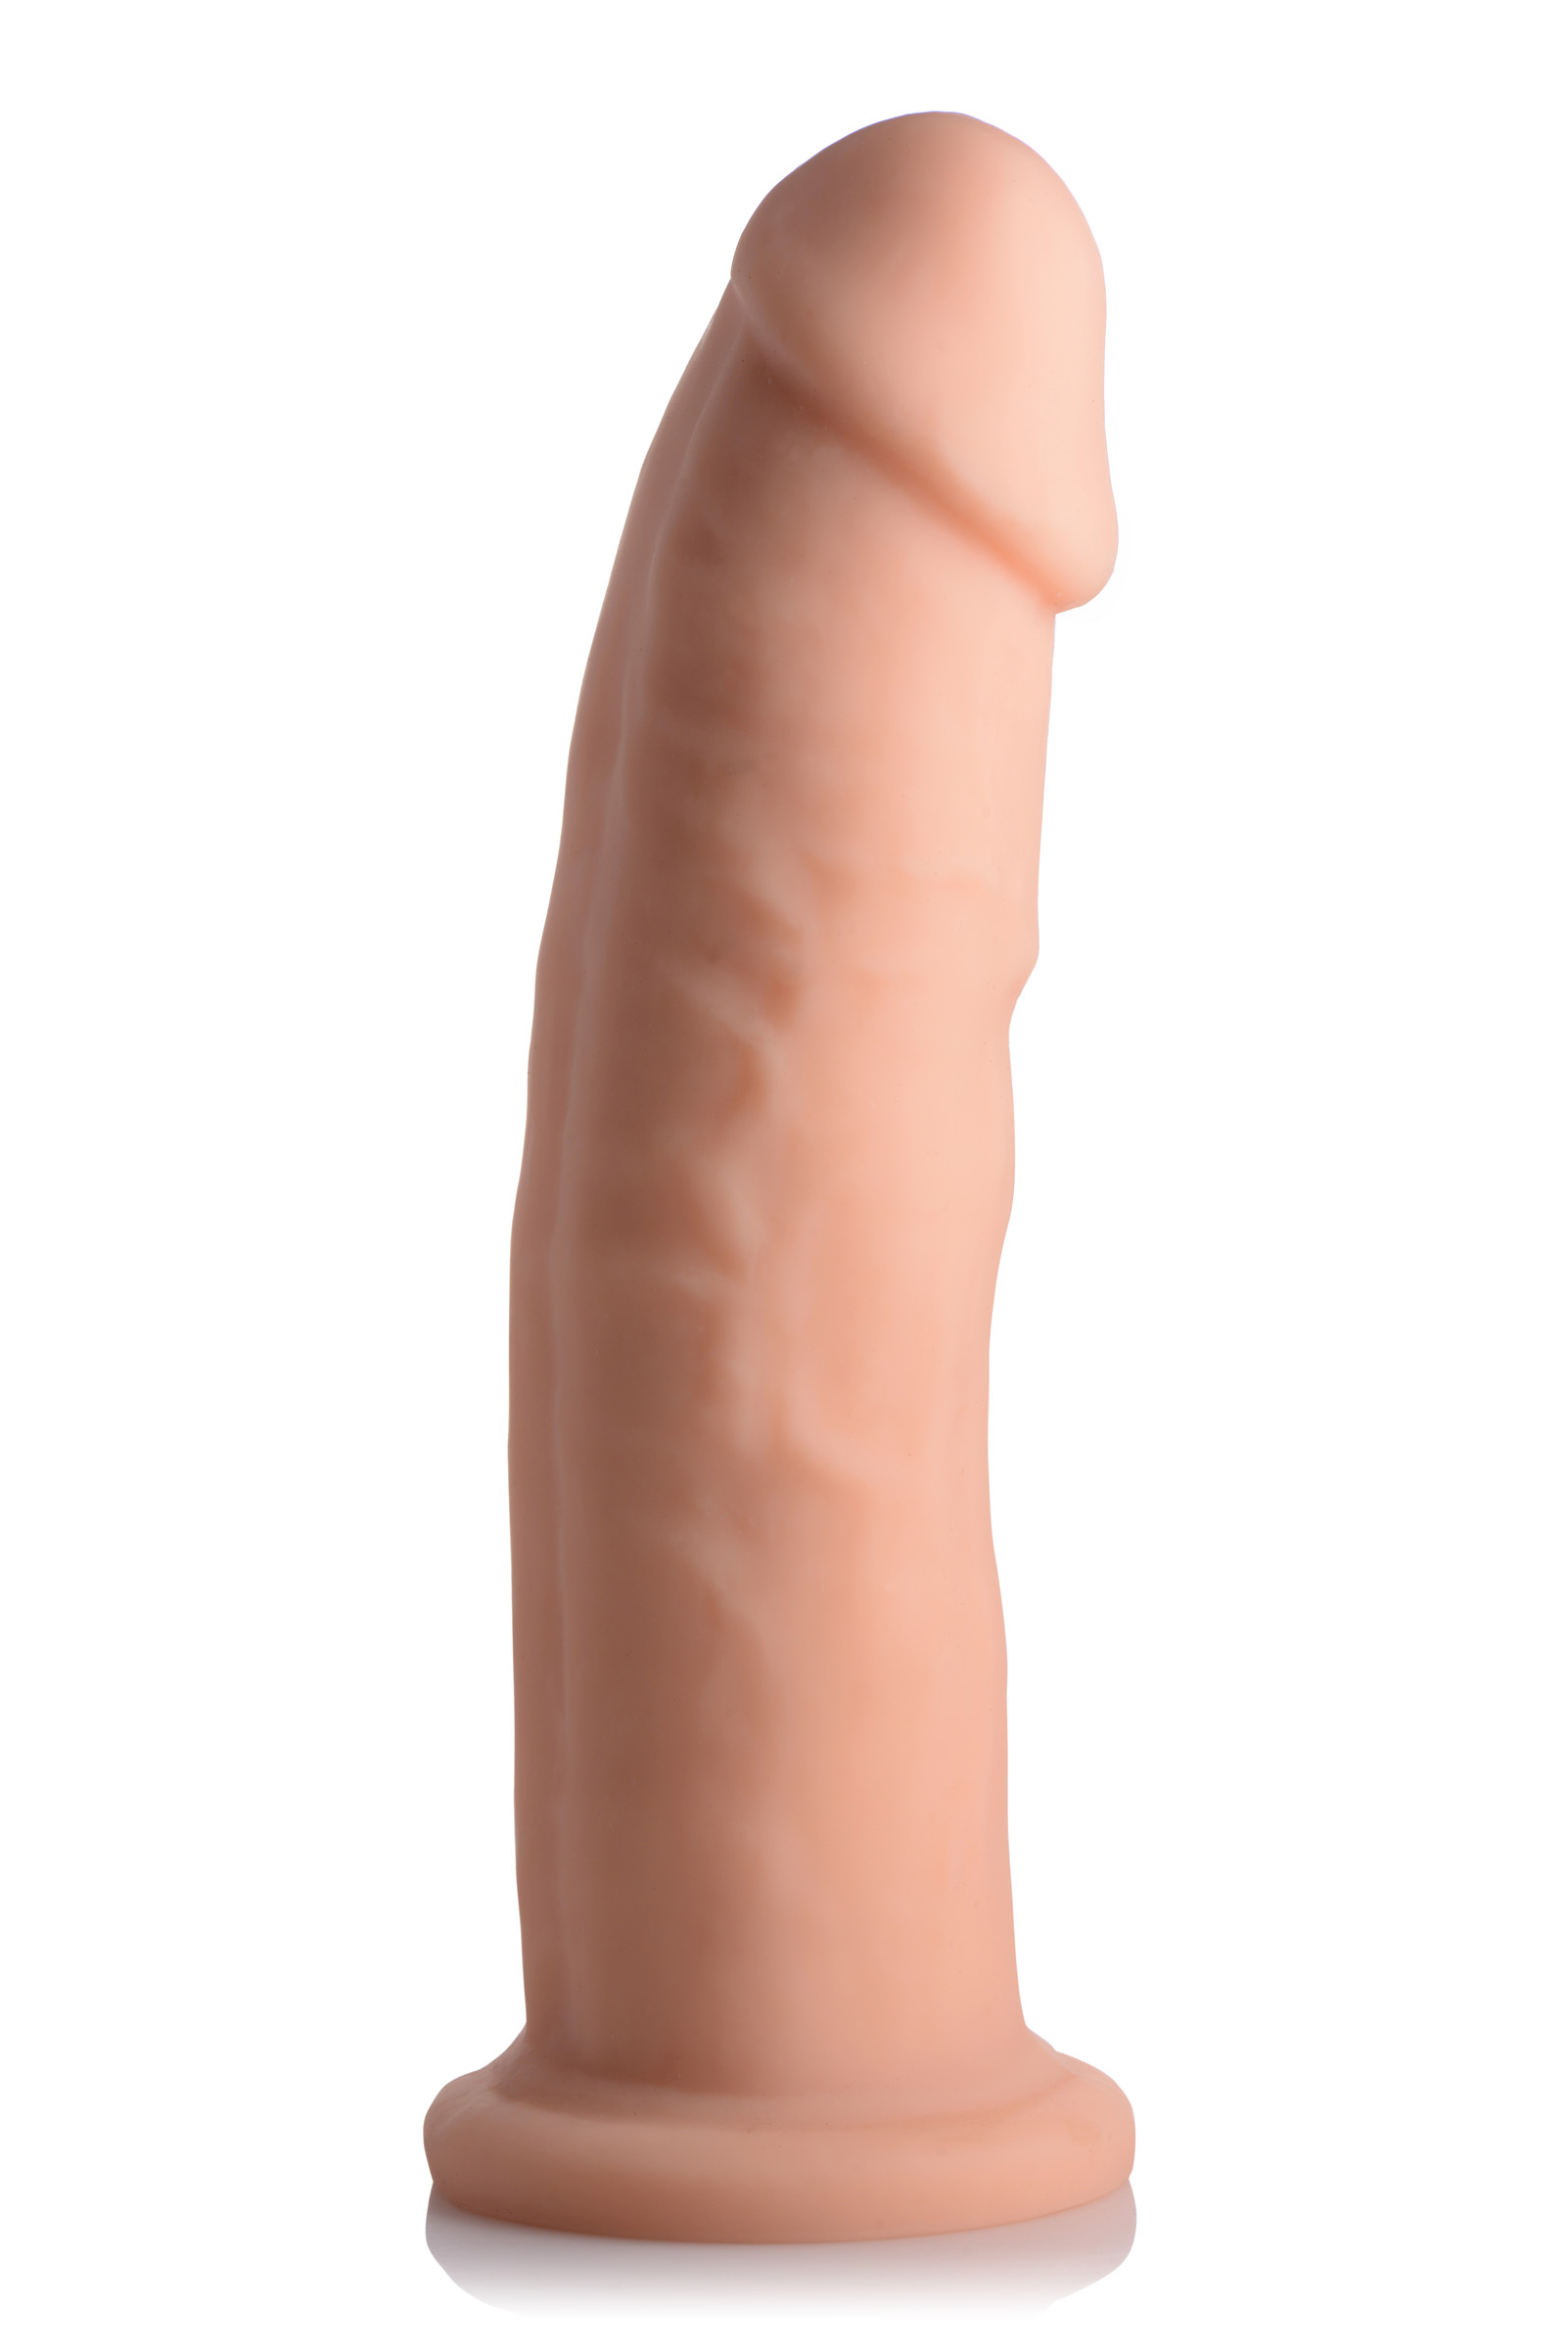 Seven inches of shaft... no balls to get in the way! This simply luscious dildo is made with ultra-premium silicone to give you a lasting pleasure tool that you can trust. The defined head and bulging veins make this dong look and feel like the real thing... or maybe even better! The strong suction cup base sticks to just about any flat surface so that you can it for a ride. You can even warm it up or cool it down for a variety of sensations. The hypoallergenic material is easy to clean with mild soap or a toy cleaner